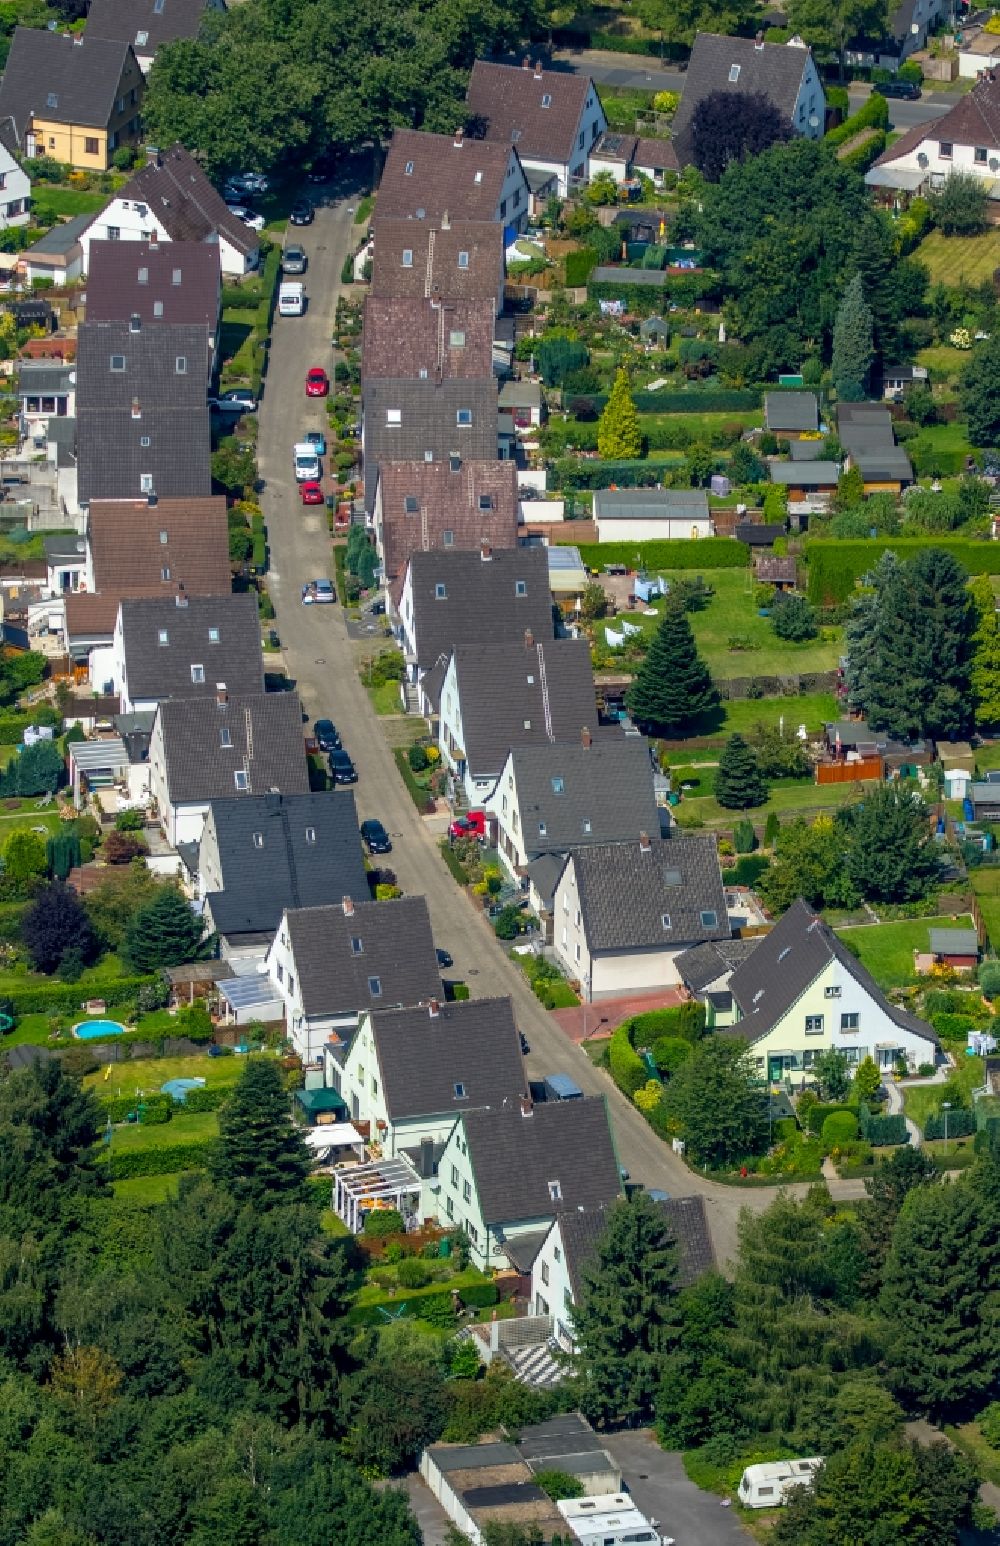 Aerial image Bochum - Multi-family houses at the Heidackerstrasse in Bochum in the state North Rhine-Westphalia